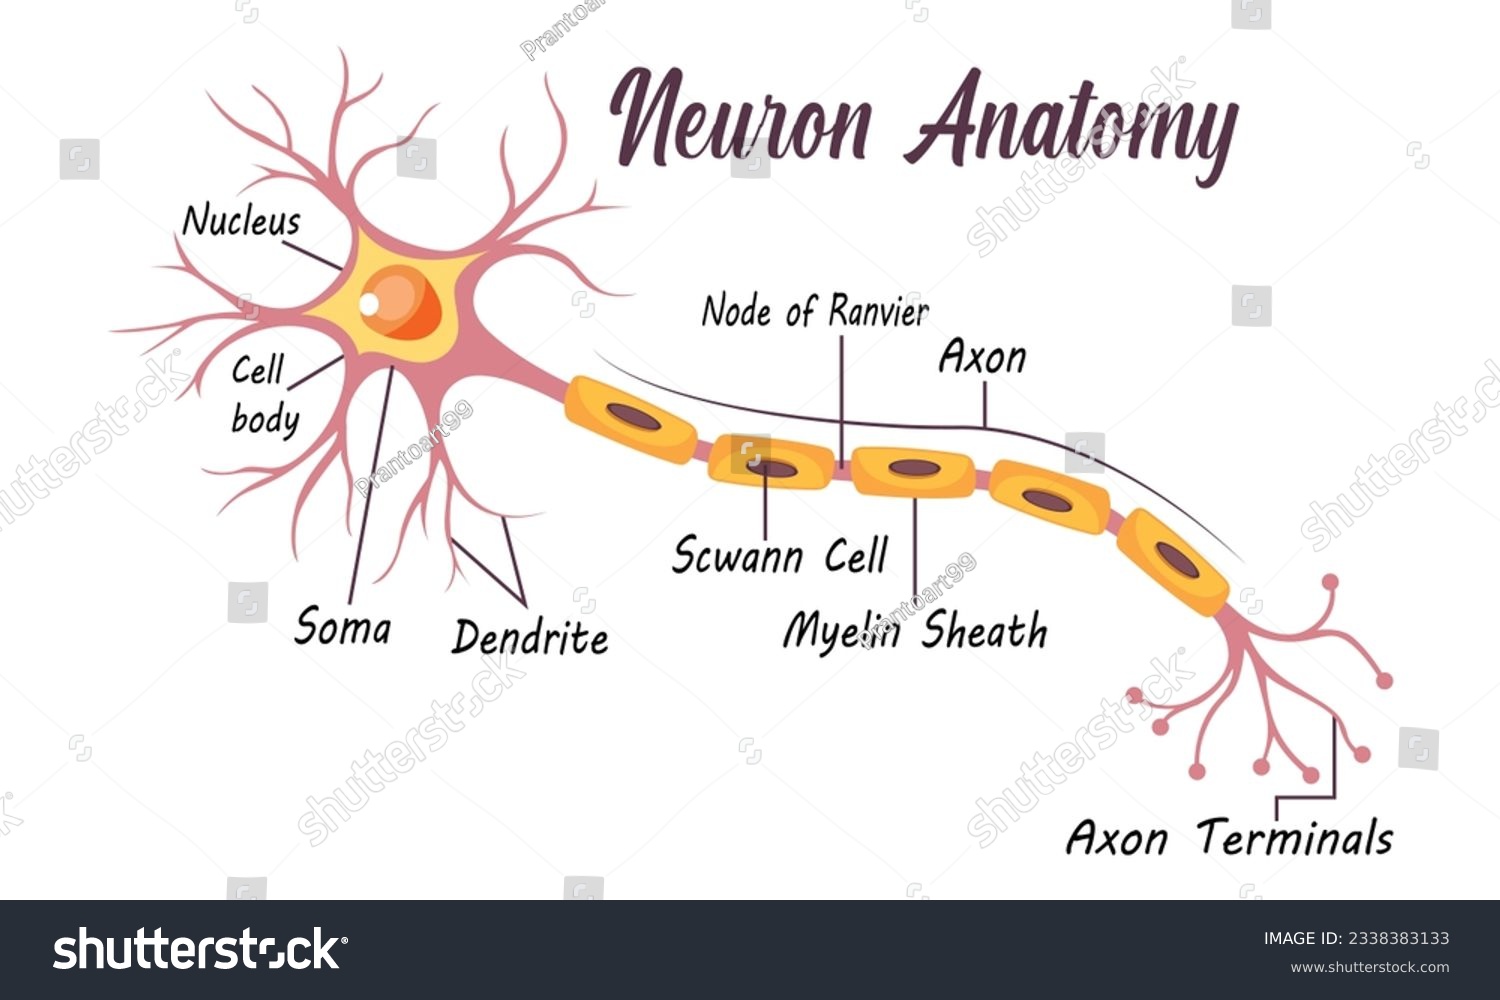 SVG of Neuron Anatomy of Human Cell Line Art Vector and Illustration Design. Neuron Anatomy And Human Cell Line Art Design and Creative Kids. svg